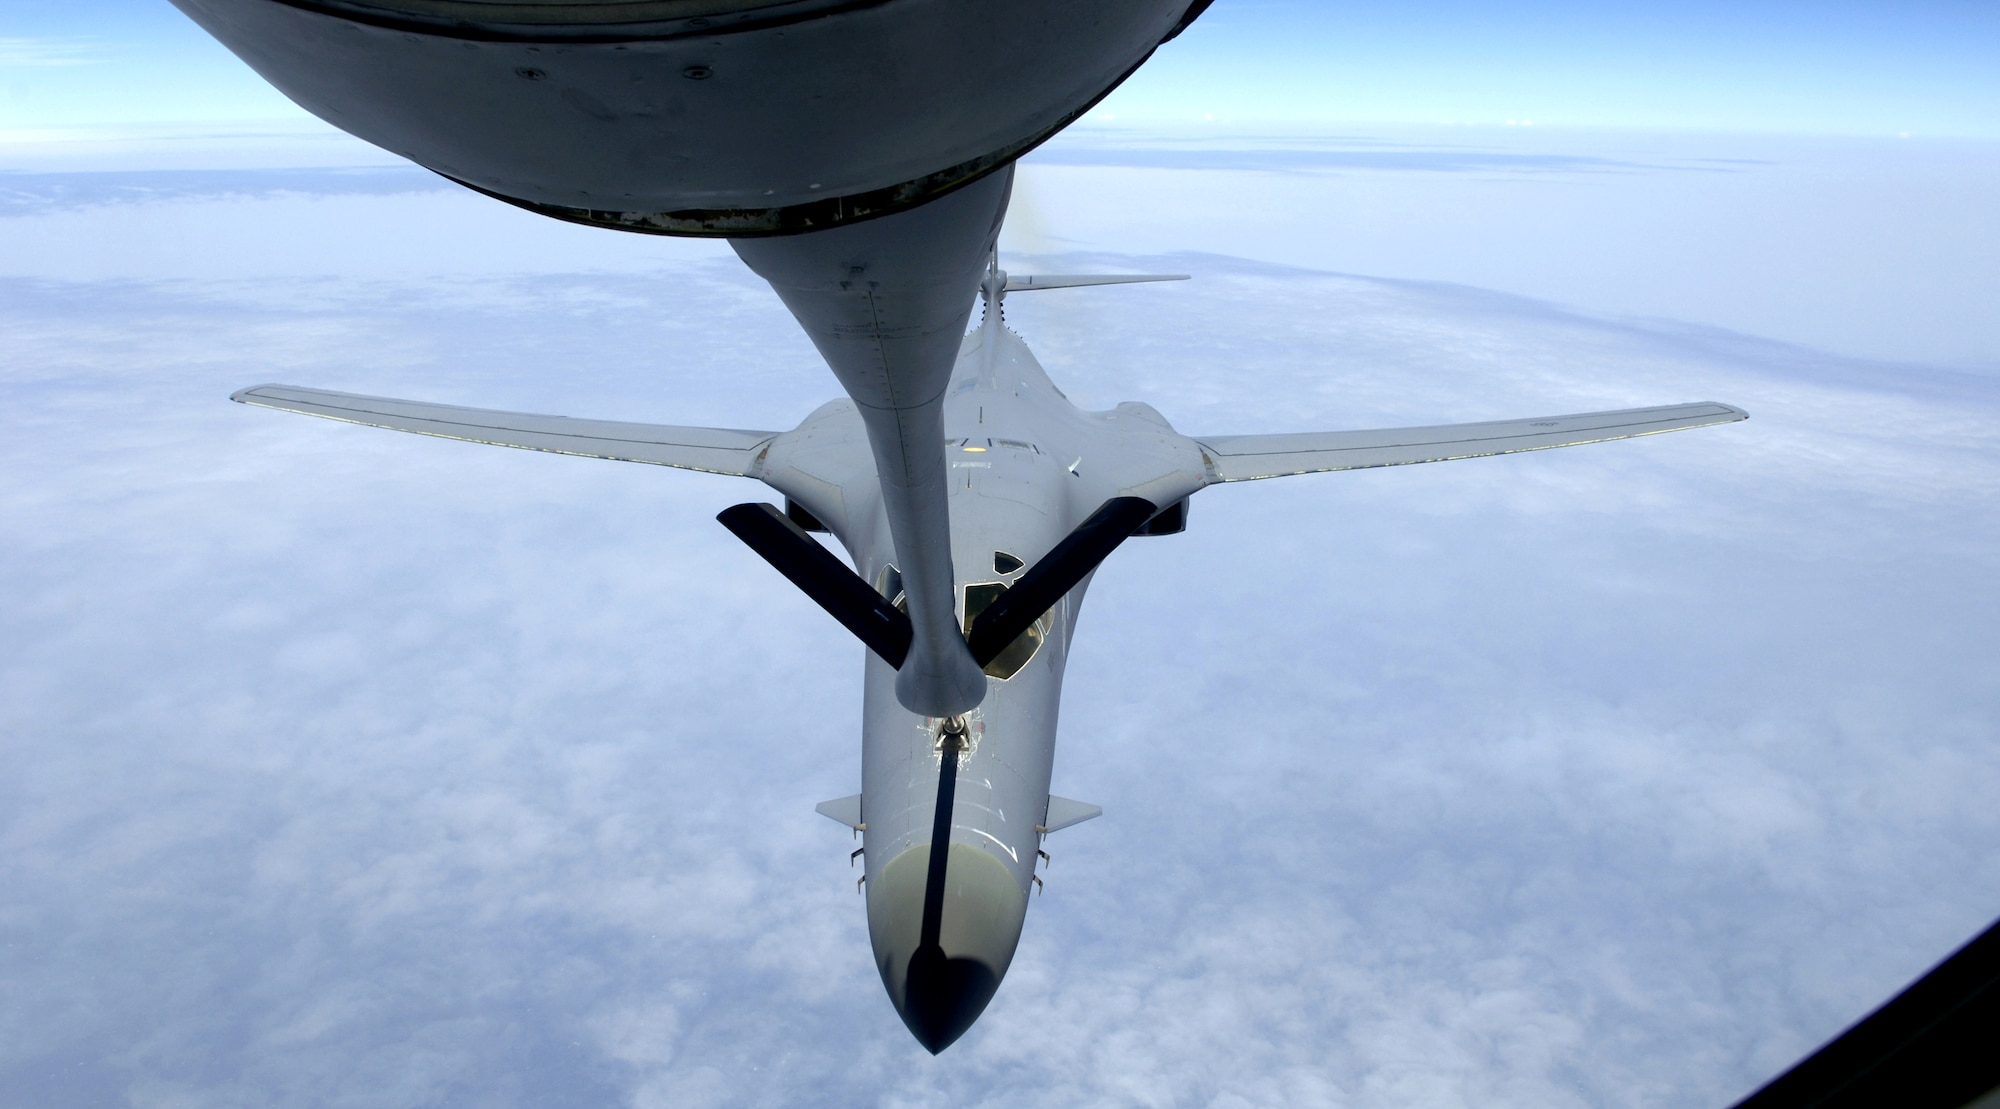 A B-1B Lancer connects with a KC-135 Stratotanker refueling boom over the Indian Ocean on Friday, July 7. The B-1 was flying a close-air support mission in support of Operation Enduring Freedom. The B-1 and KC-135 aircraft are stationed at a forward operating base in Southwest Asia. (U.S. Air Force photo/Senior Airman Brian Ferguson)